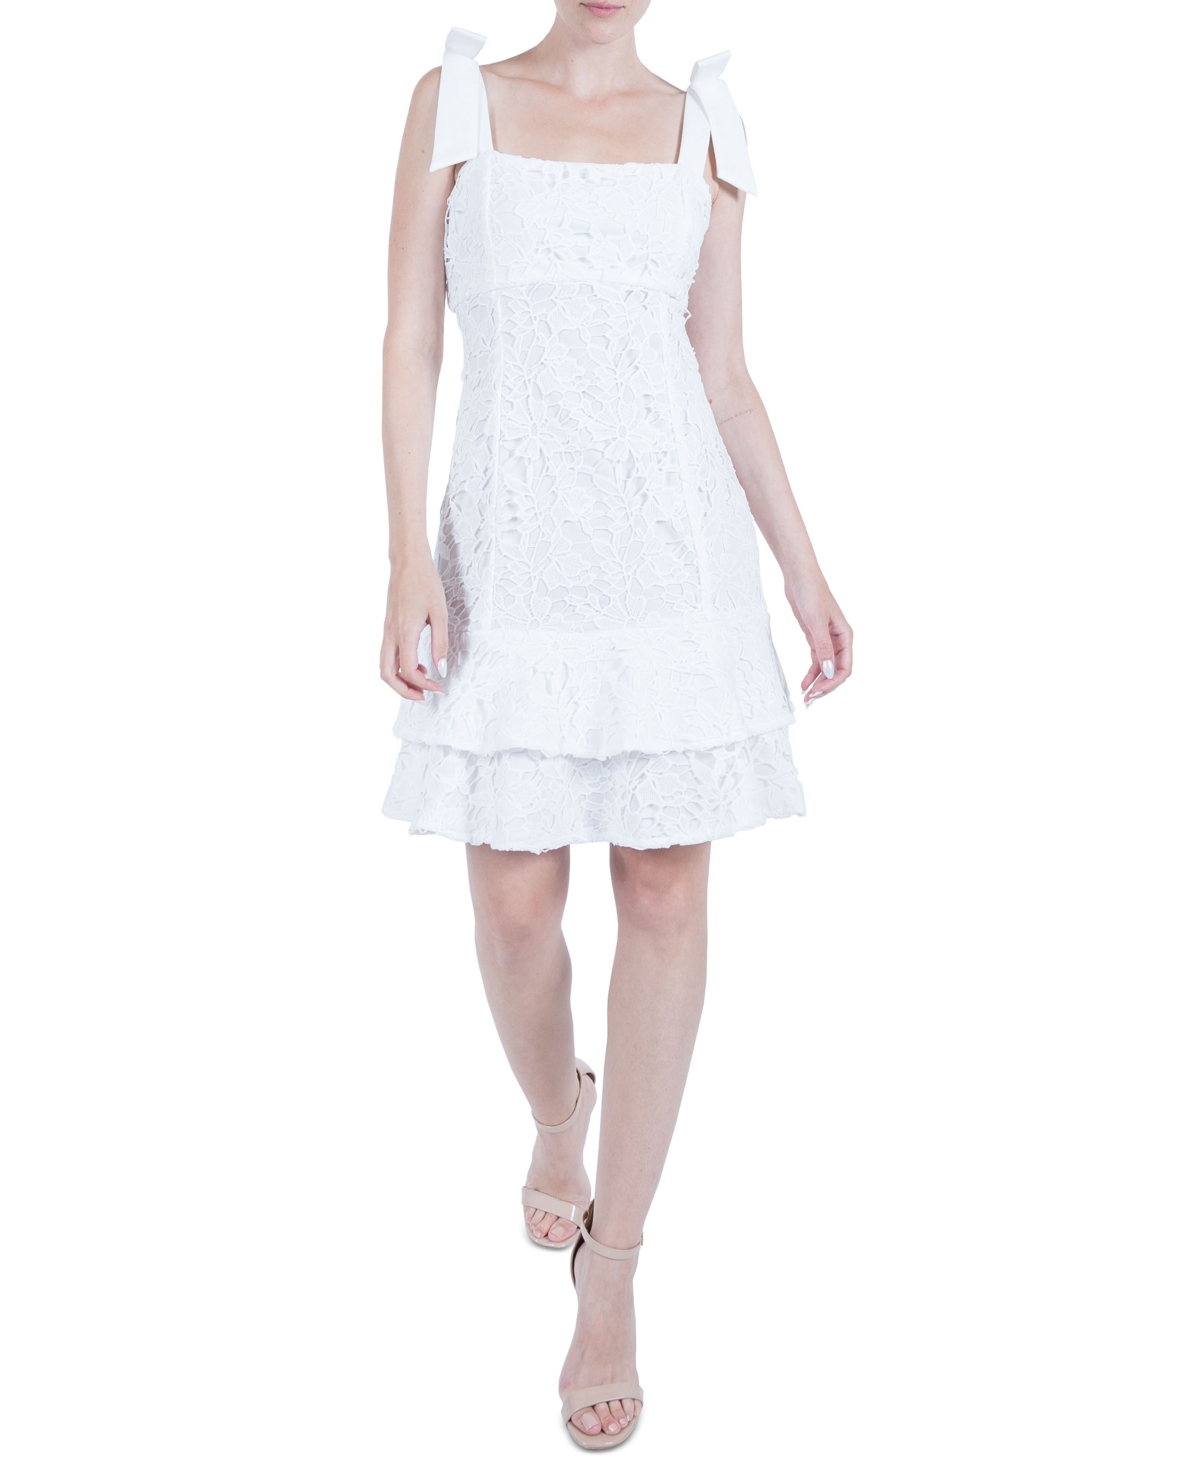 Women's Lace Bow-Trim Tiered Dress - Ivory